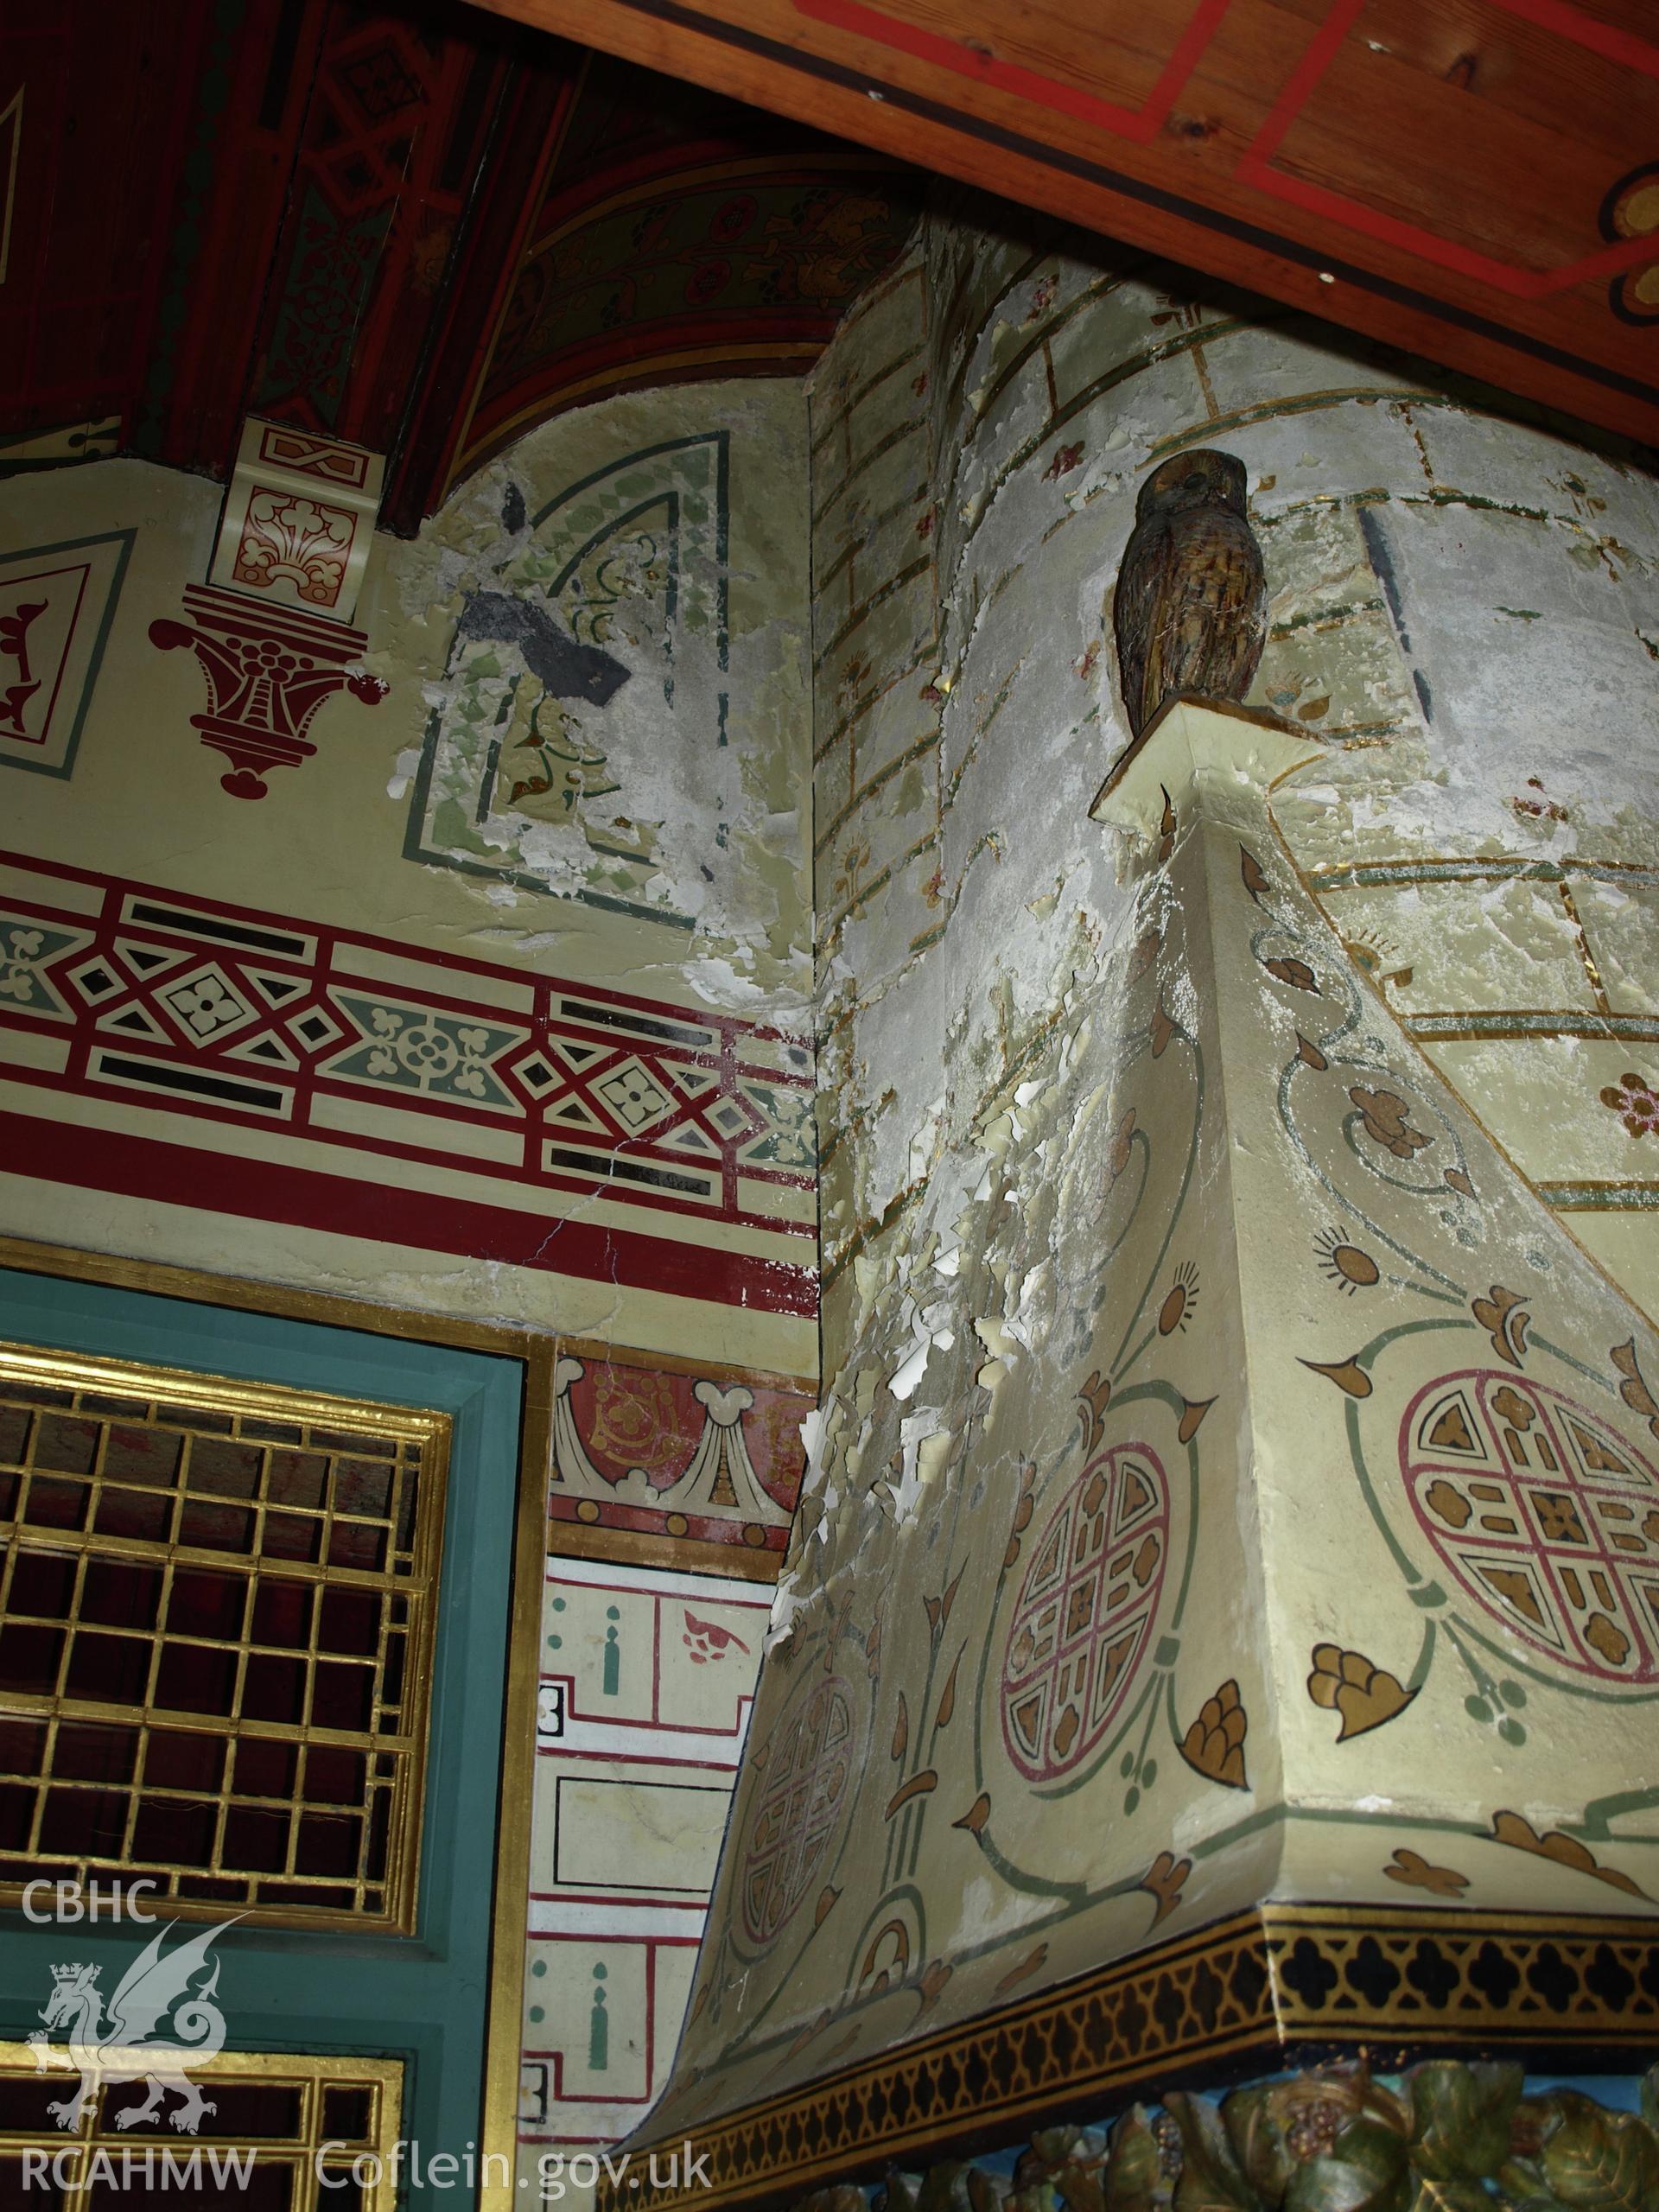 Highly decorative wall in Lord Bute's Bedroom at Castell Coch, 01/04/2019. From "Castell Coch, Tongwynlais. Archaeological Building Investigation & Recording & Watching Brief" by Richard Scott Jones, Heritage Recording Services Wales. Report No 202.